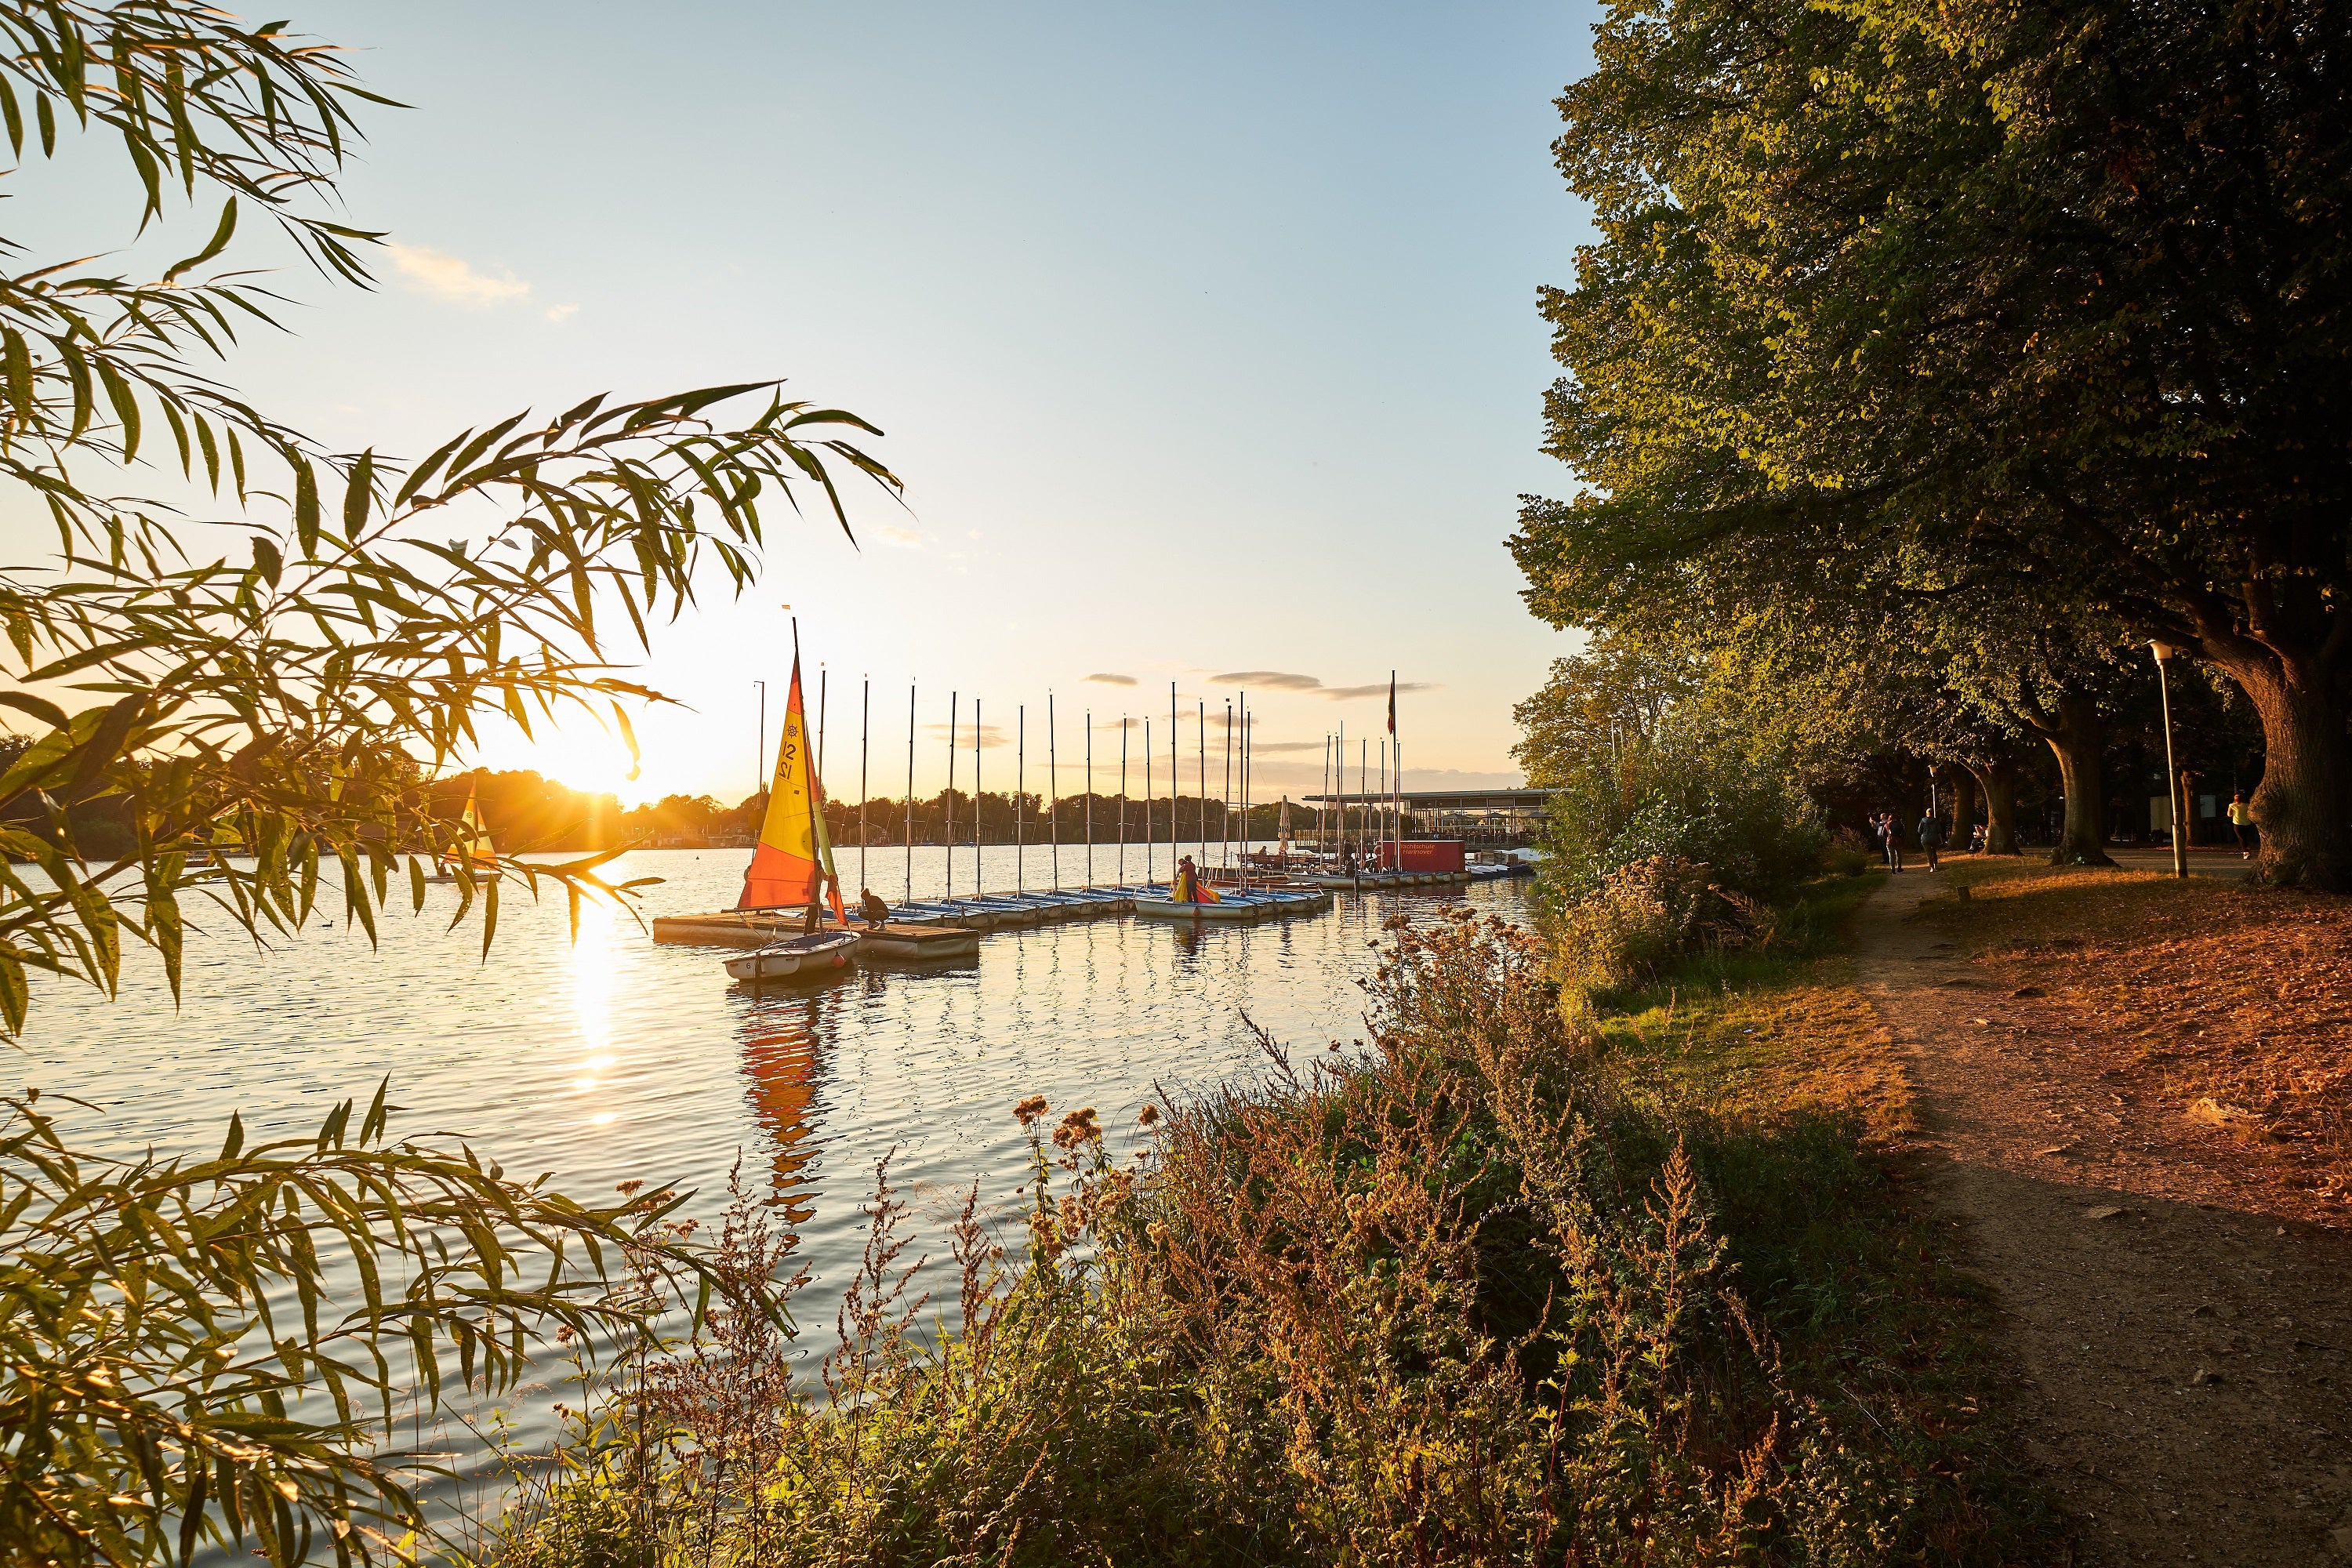 Dinghies are easy to hire for sailing on the Maschsee, Hannover